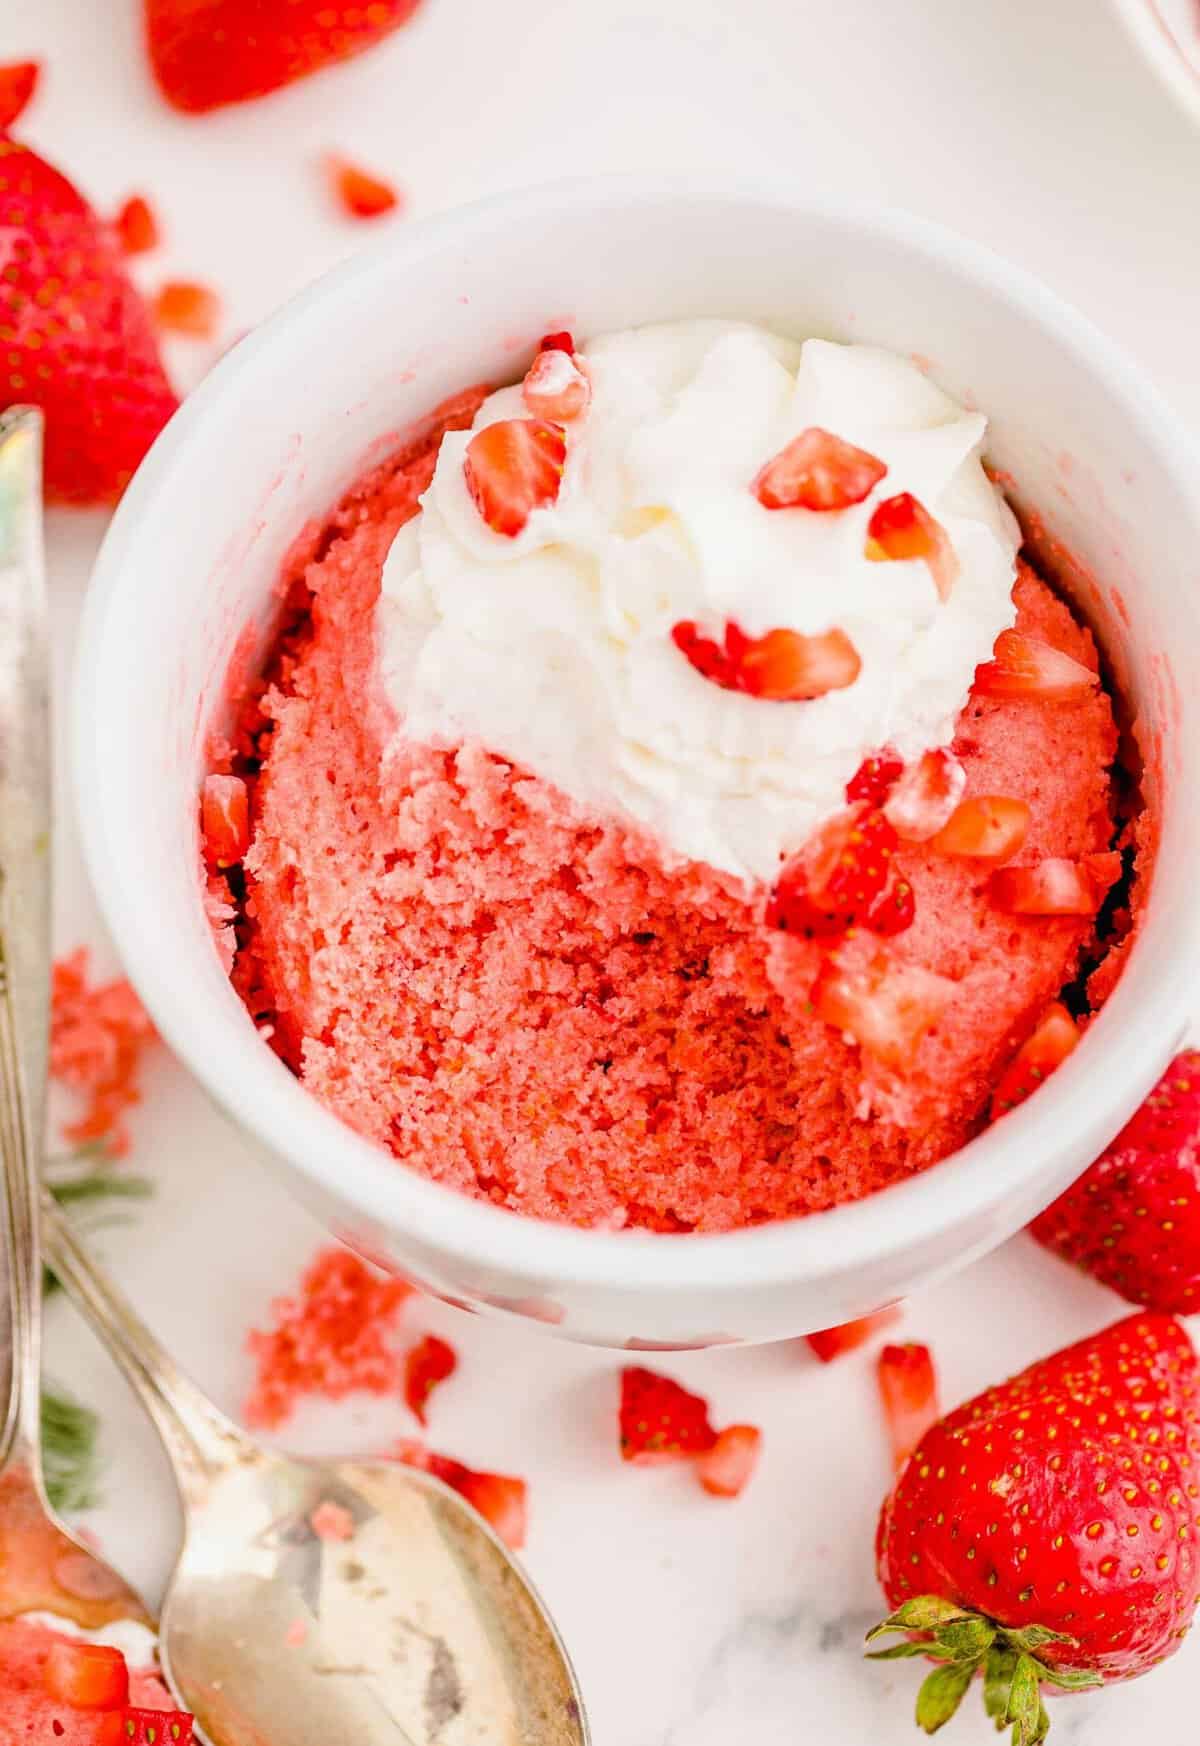 Strawberry cake in mug topped with whipped cream and diced strawberries